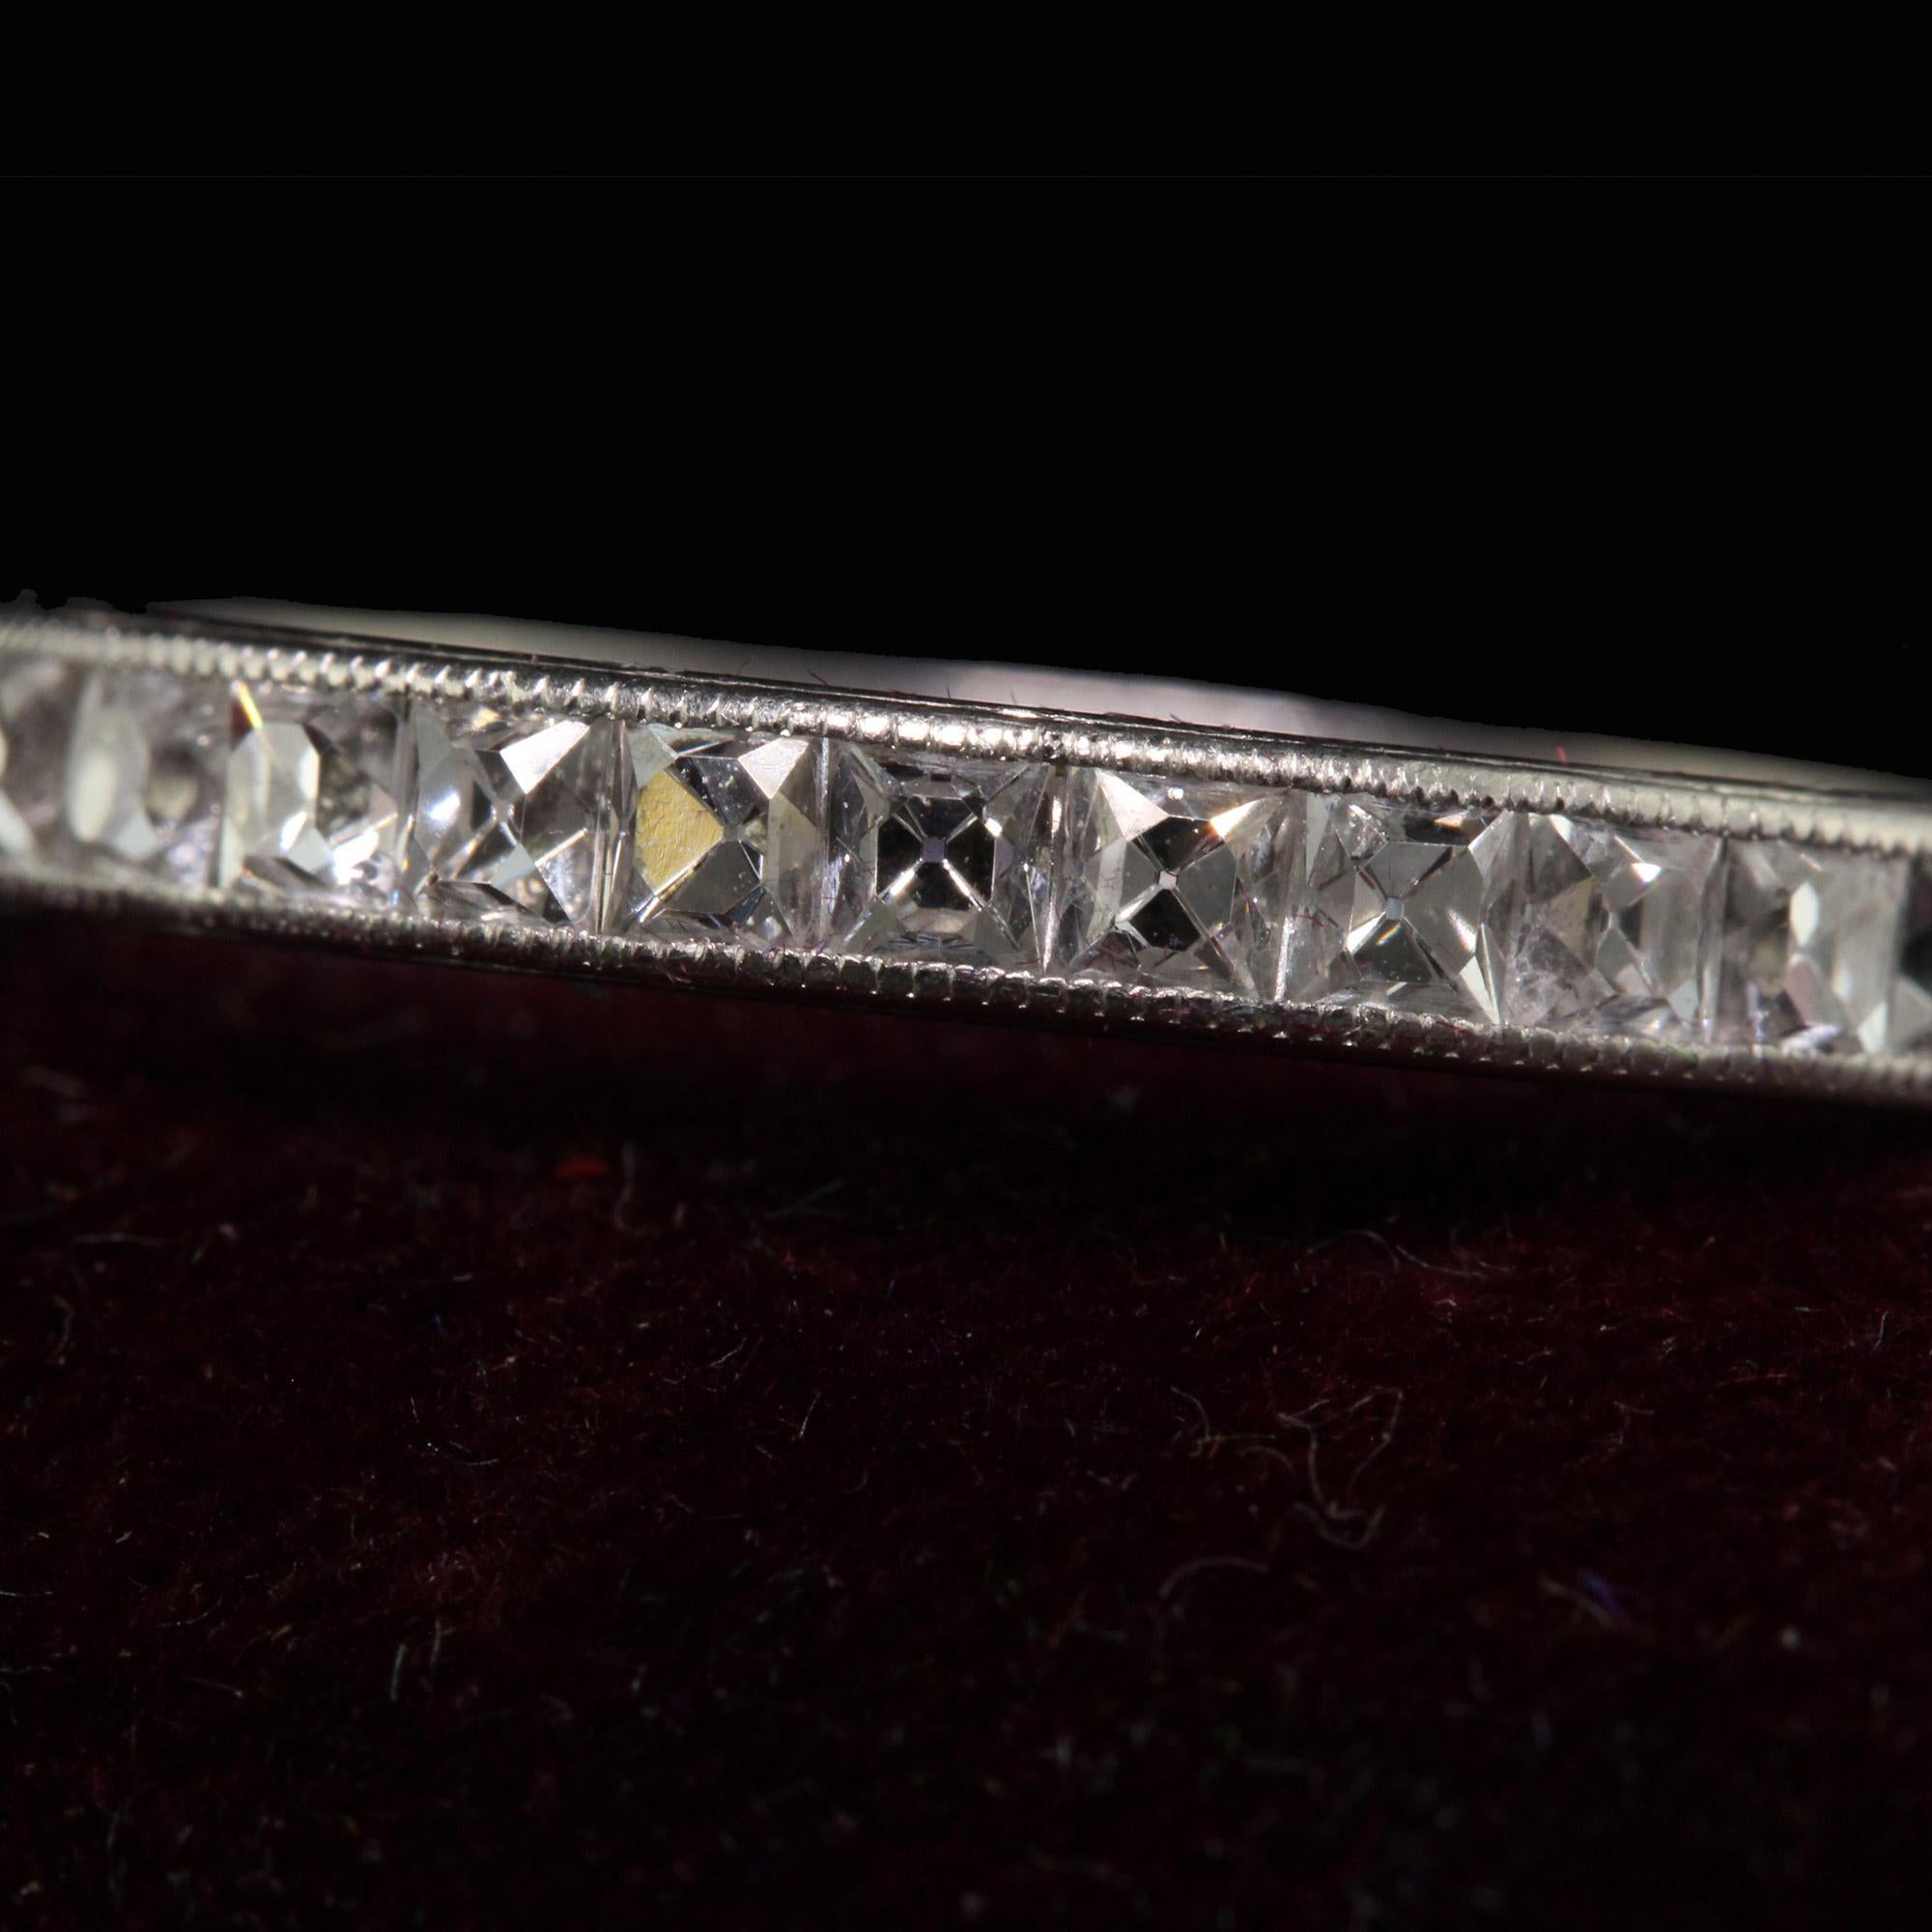 Antique Edwardian Platinum French Cut Diamond Engraved Eternity Ring - Size 7 In Good Condition For Sale In Great Neck, NY